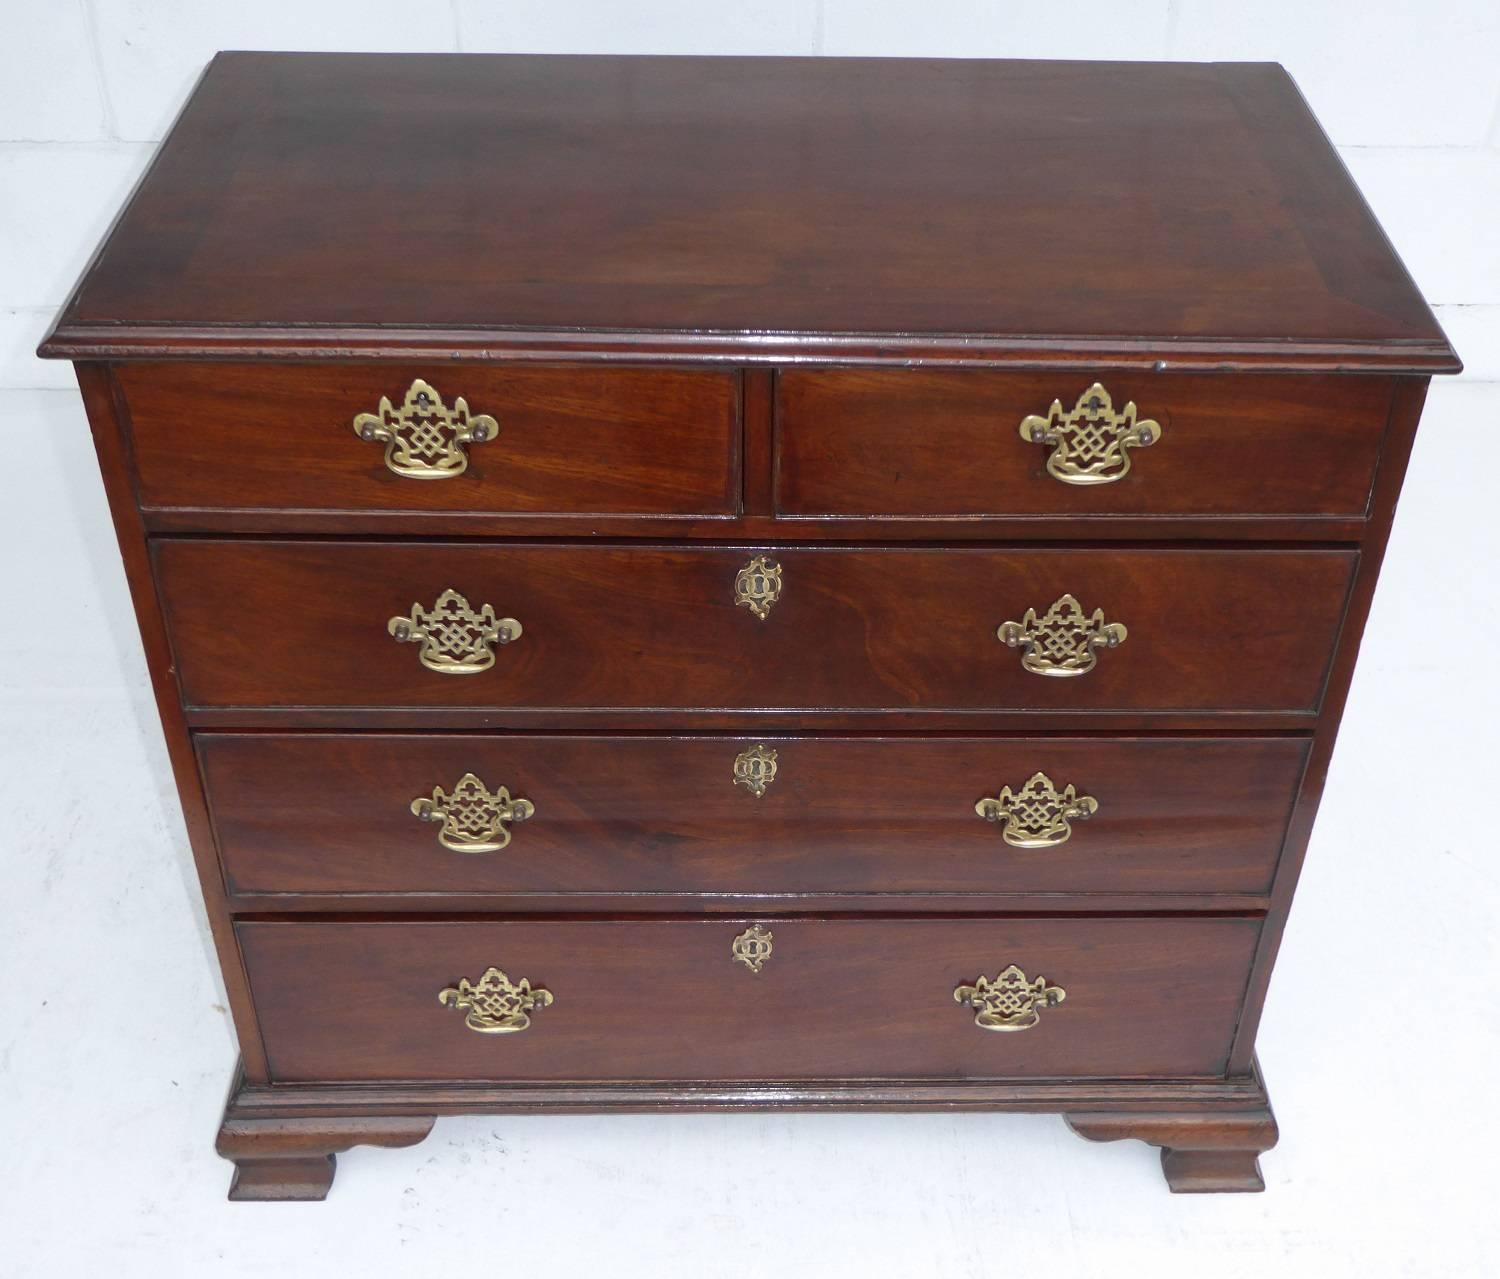 For sale is a good quality George III mahogany chest of drawers of small proportions. The chest has two short drawers, over three long drawers. Each having ornate brass handles and the long drawers with intricate brass escutcheons. The chest stands